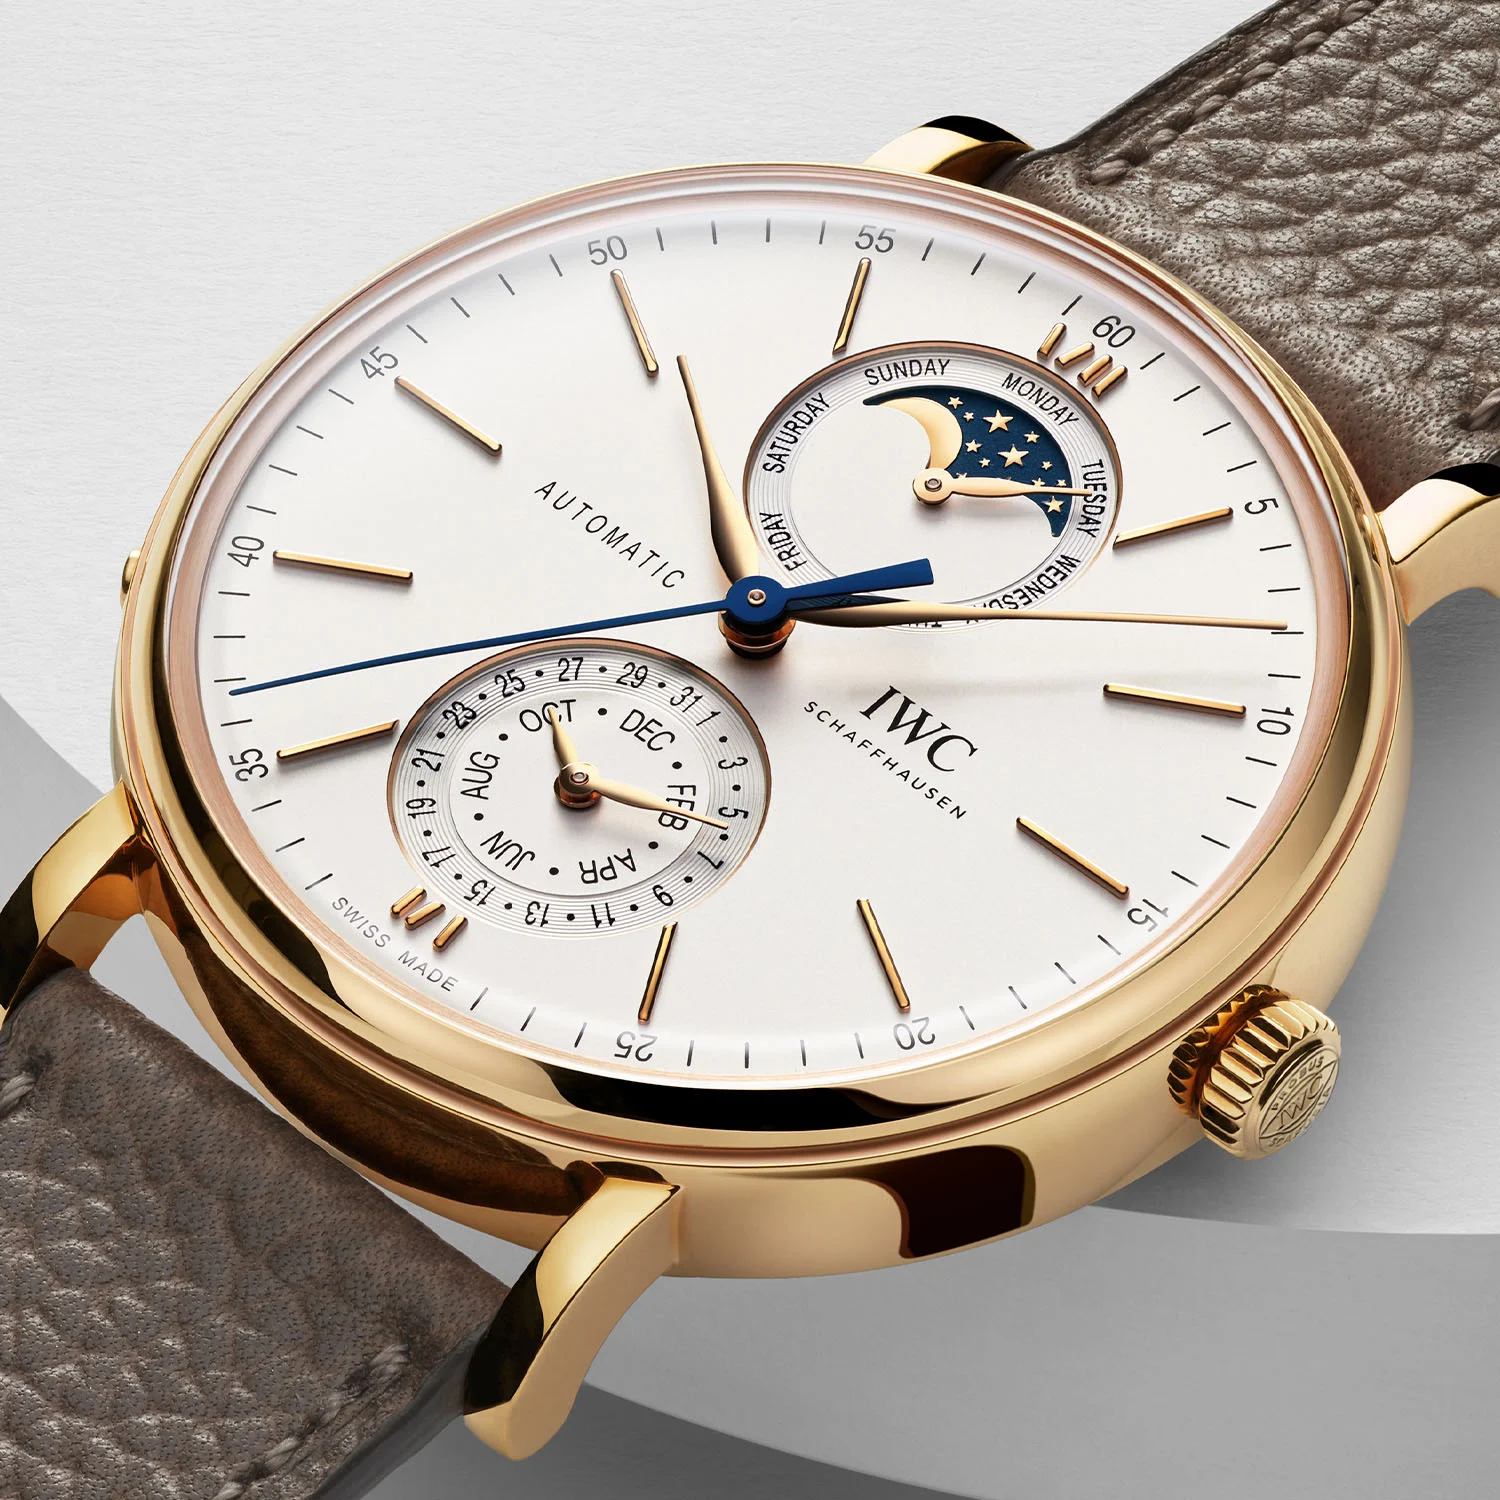 Introducing The New IWC Portofino Complete Calendar Watches ...